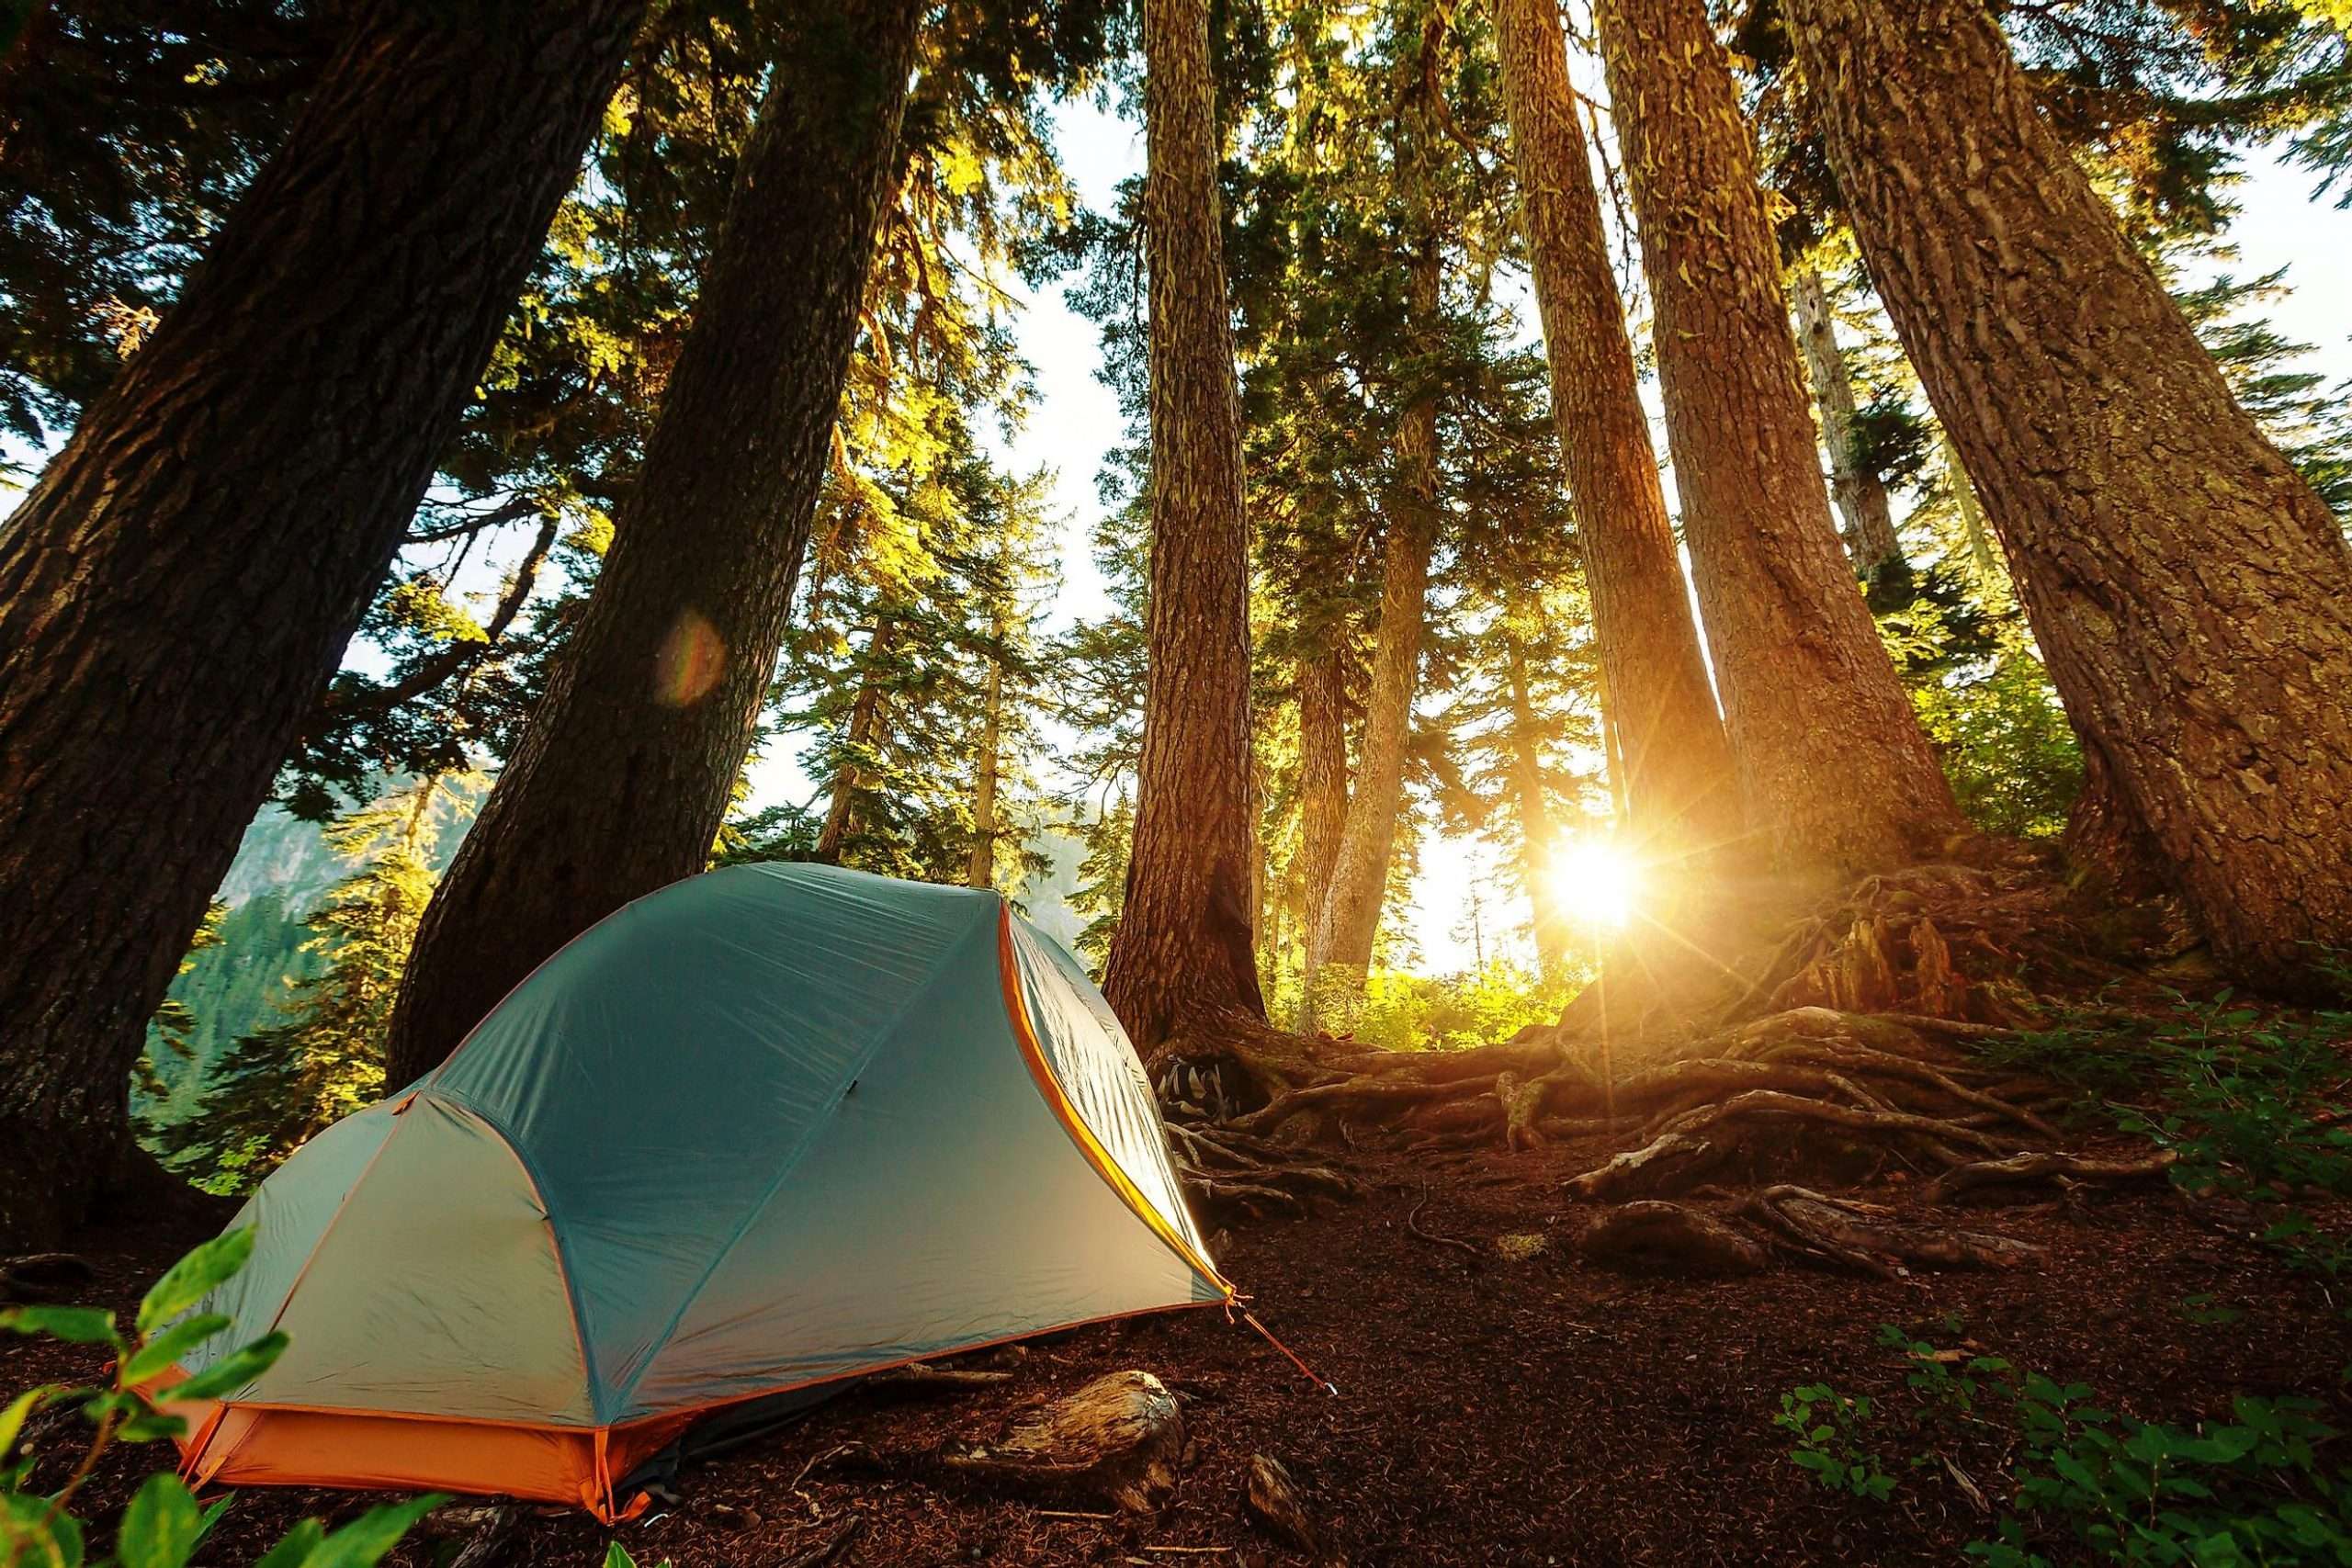 The Most Beautiful Camping Spots In The US